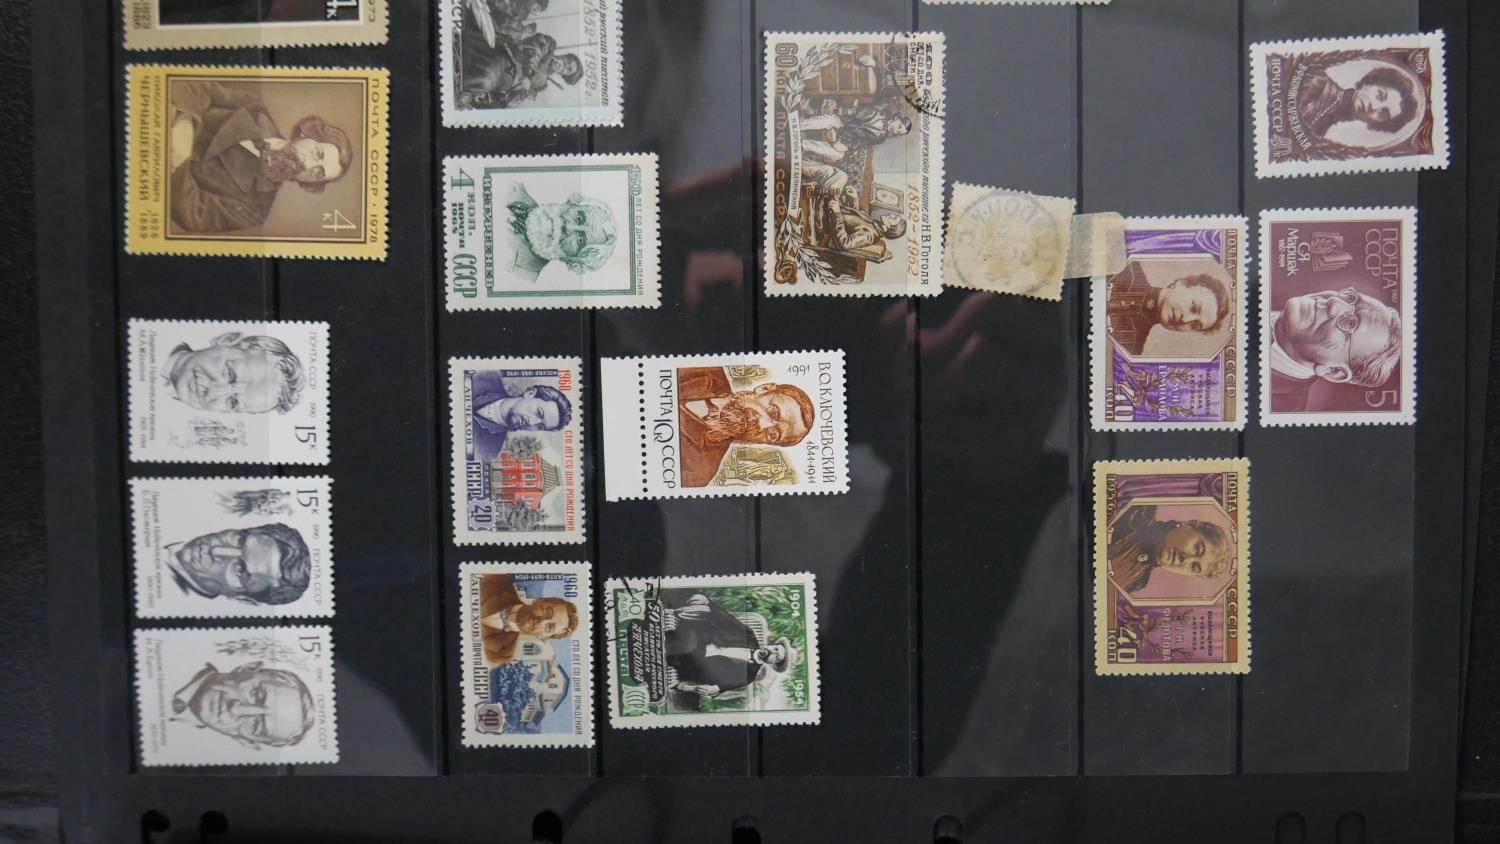 An album of world stamps along with a British Collecta coin album filled with various British coins. - Image 3 of 15